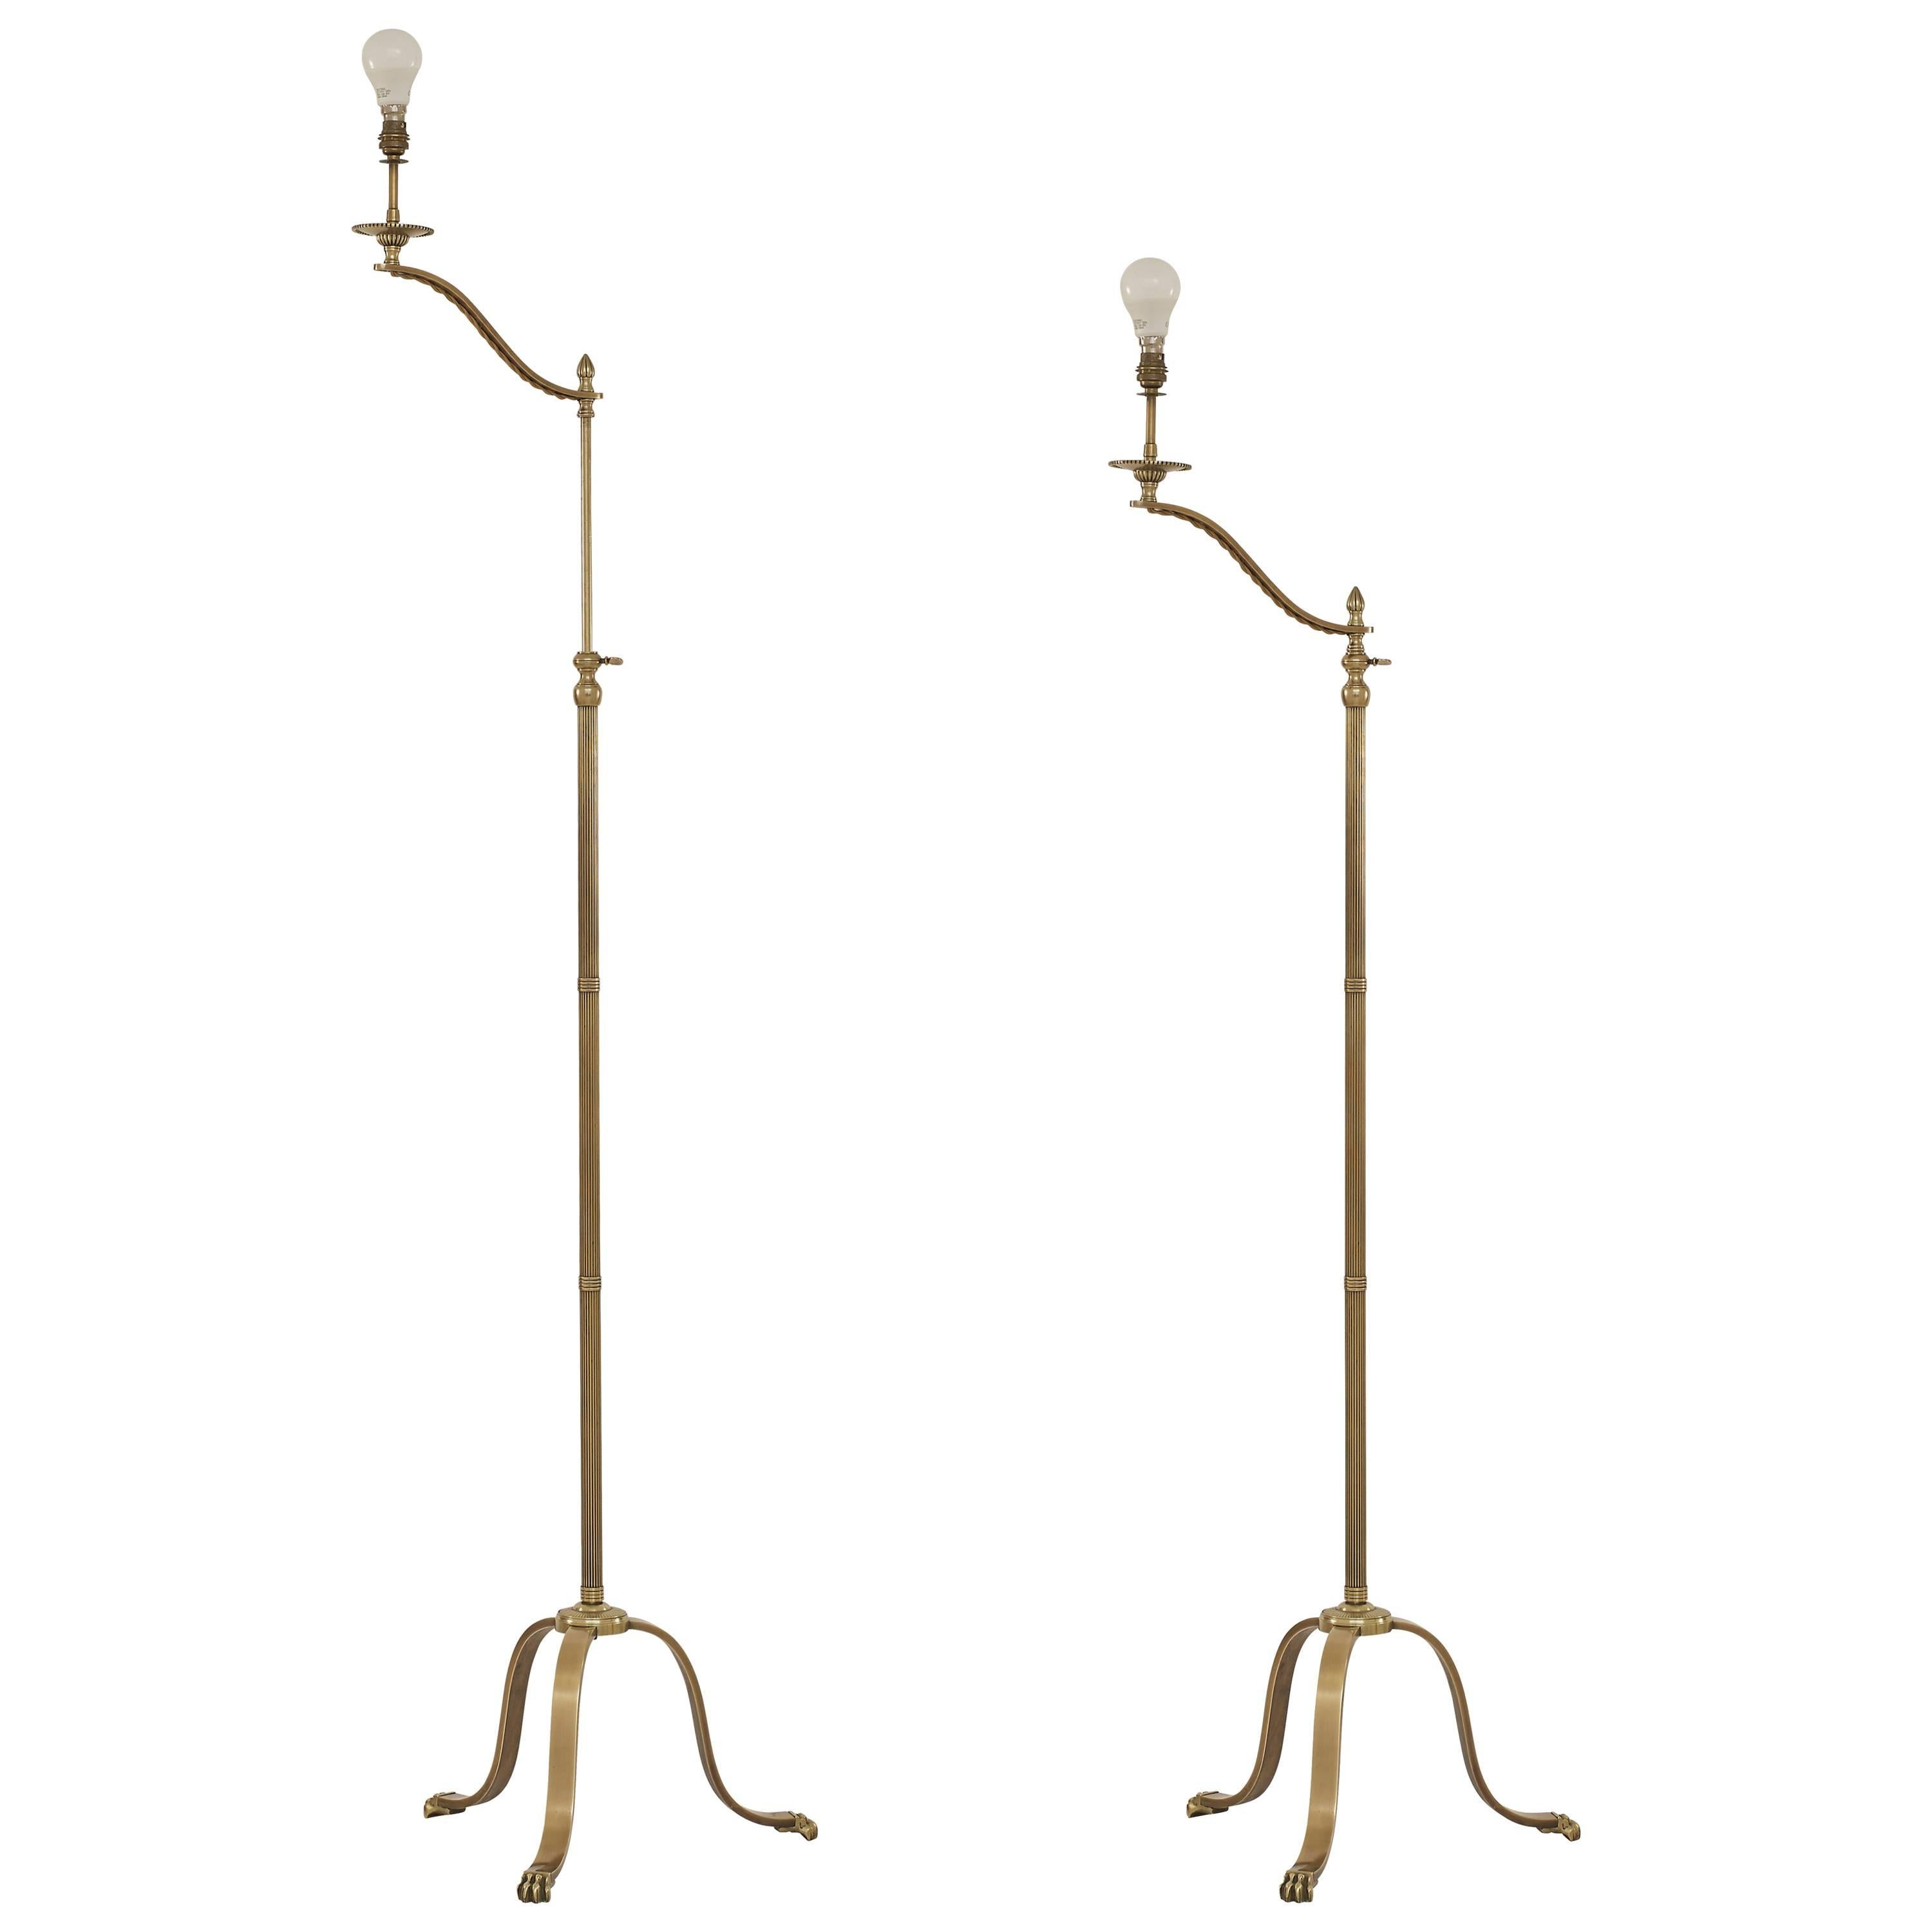 Pair of Maison Jansen Adjustable Brass Reading Floor Lamps with Claw Feet For Sale